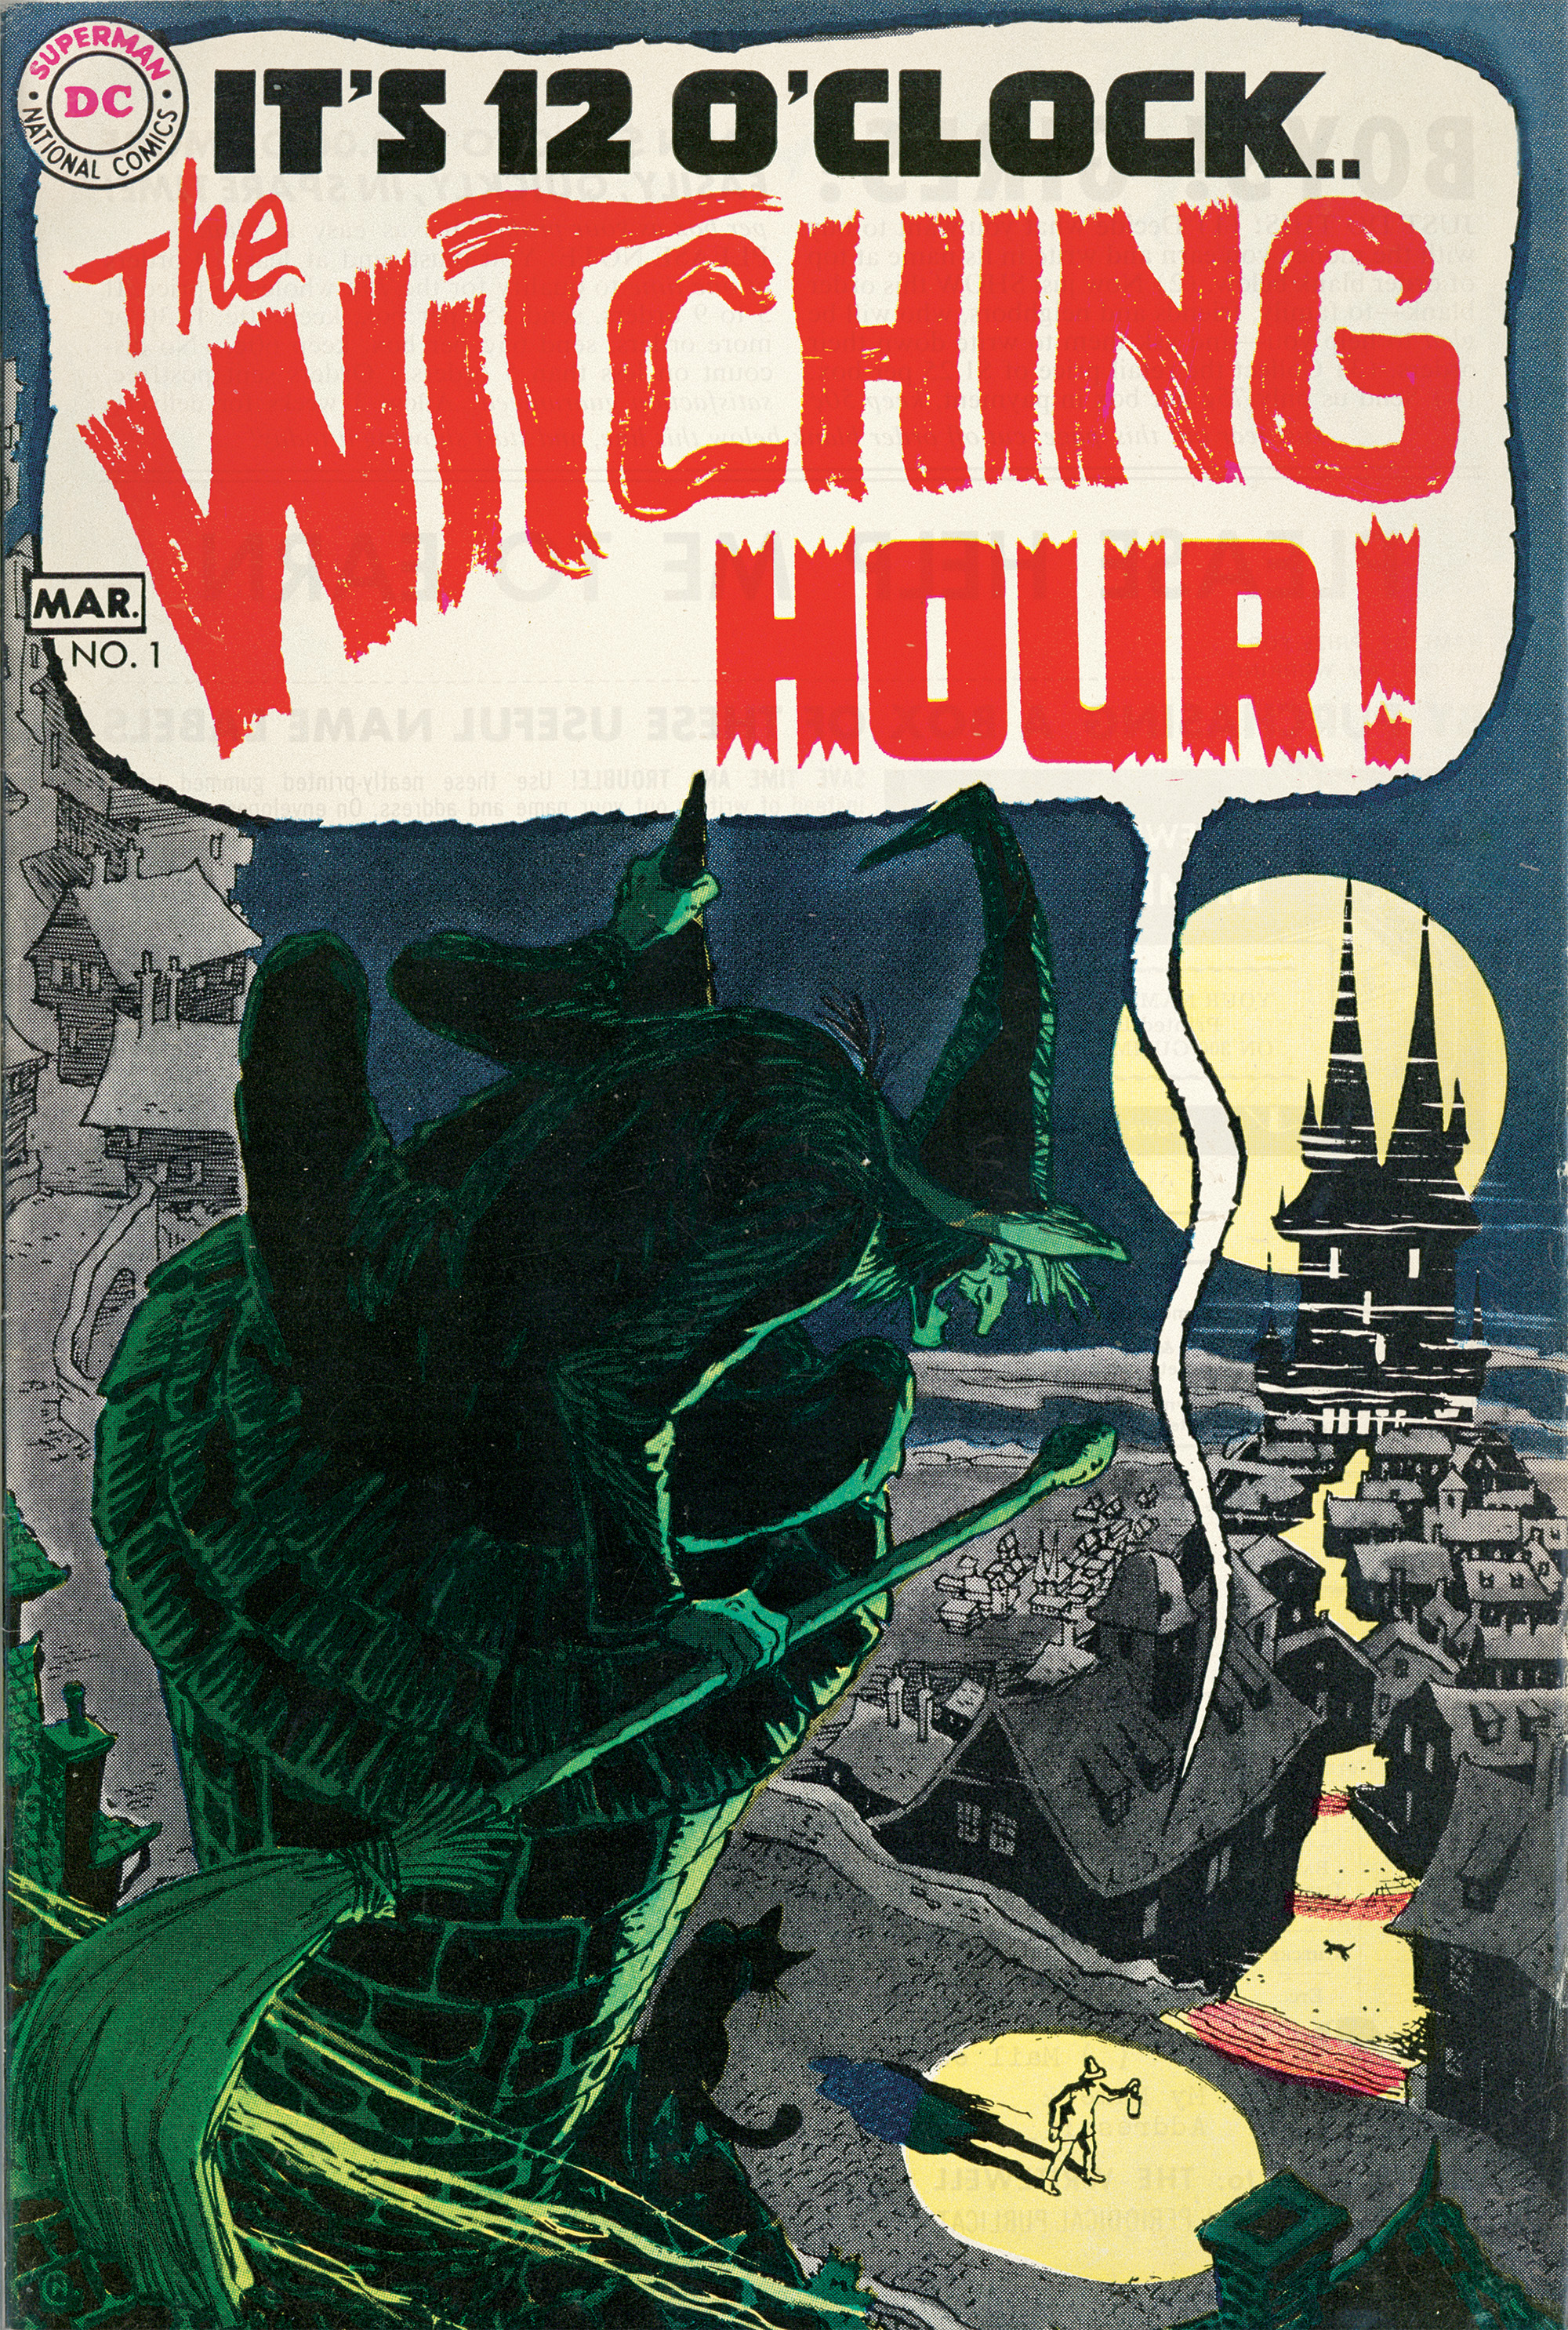 The Witching Hour (1968-1978) #1